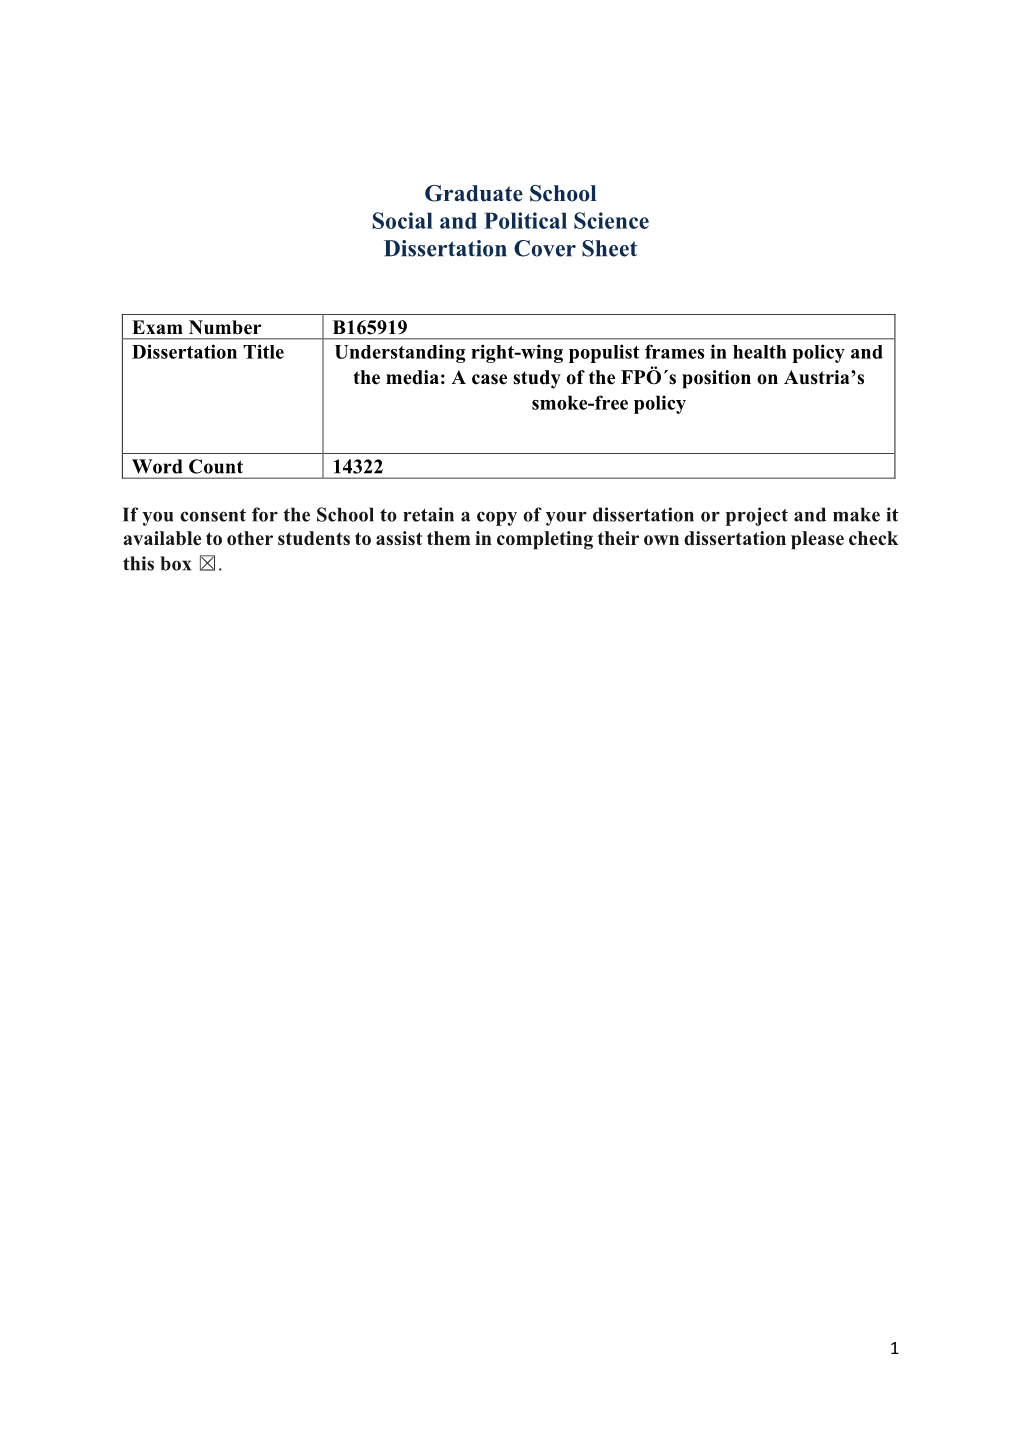 Graduate School Social and Political Science Dissertation Cover Sheet